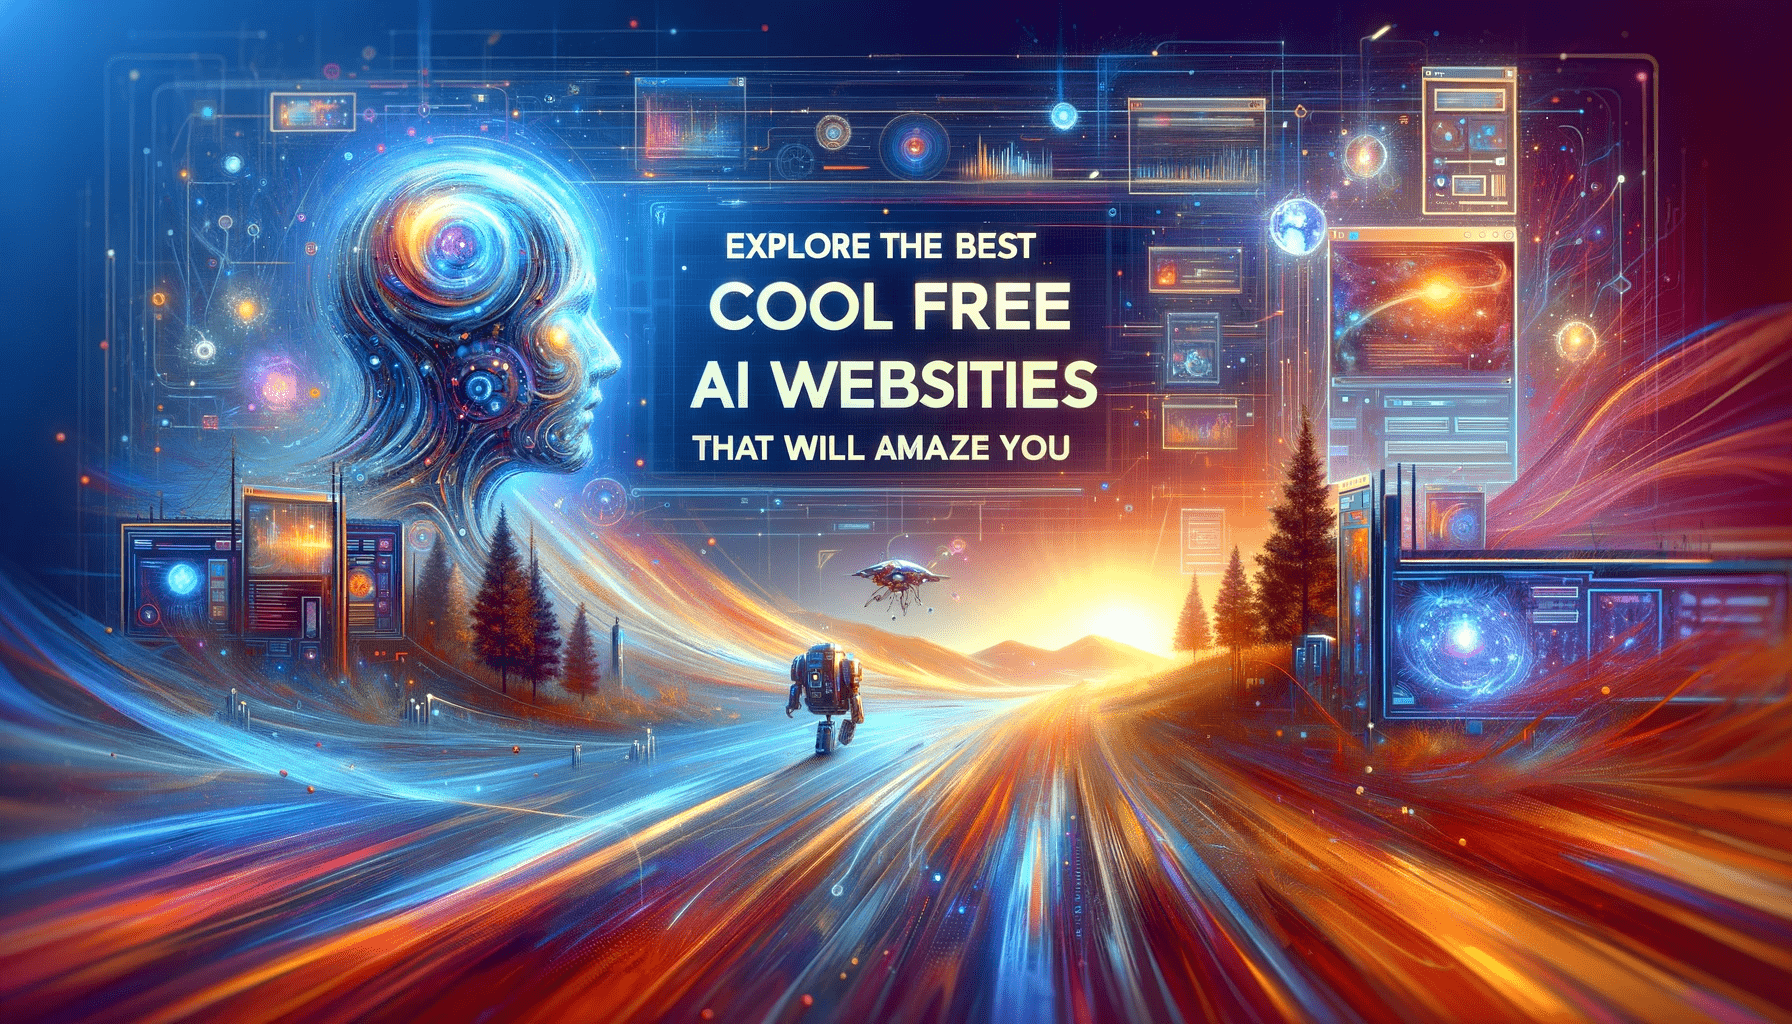 Explore the Best Cool Free AI Websites That Will Amaze You